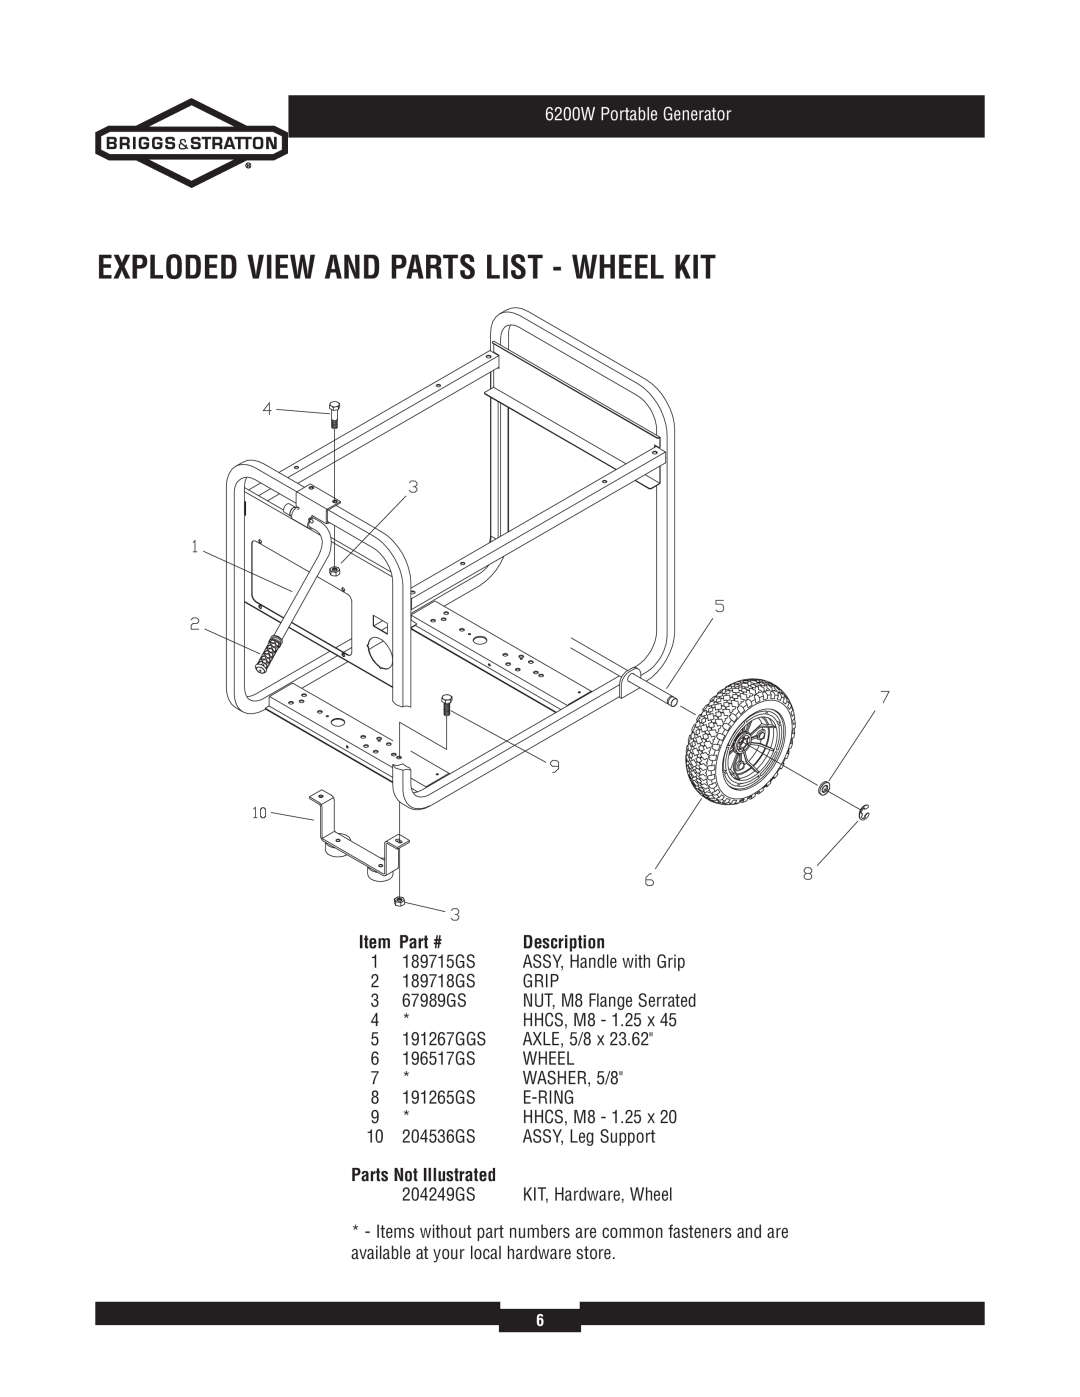 Briggs & Stratton 30358 manual Exploded View And Parts List - Wheel Kit, 6200W Portable Generator, Parts Not Illustrated 